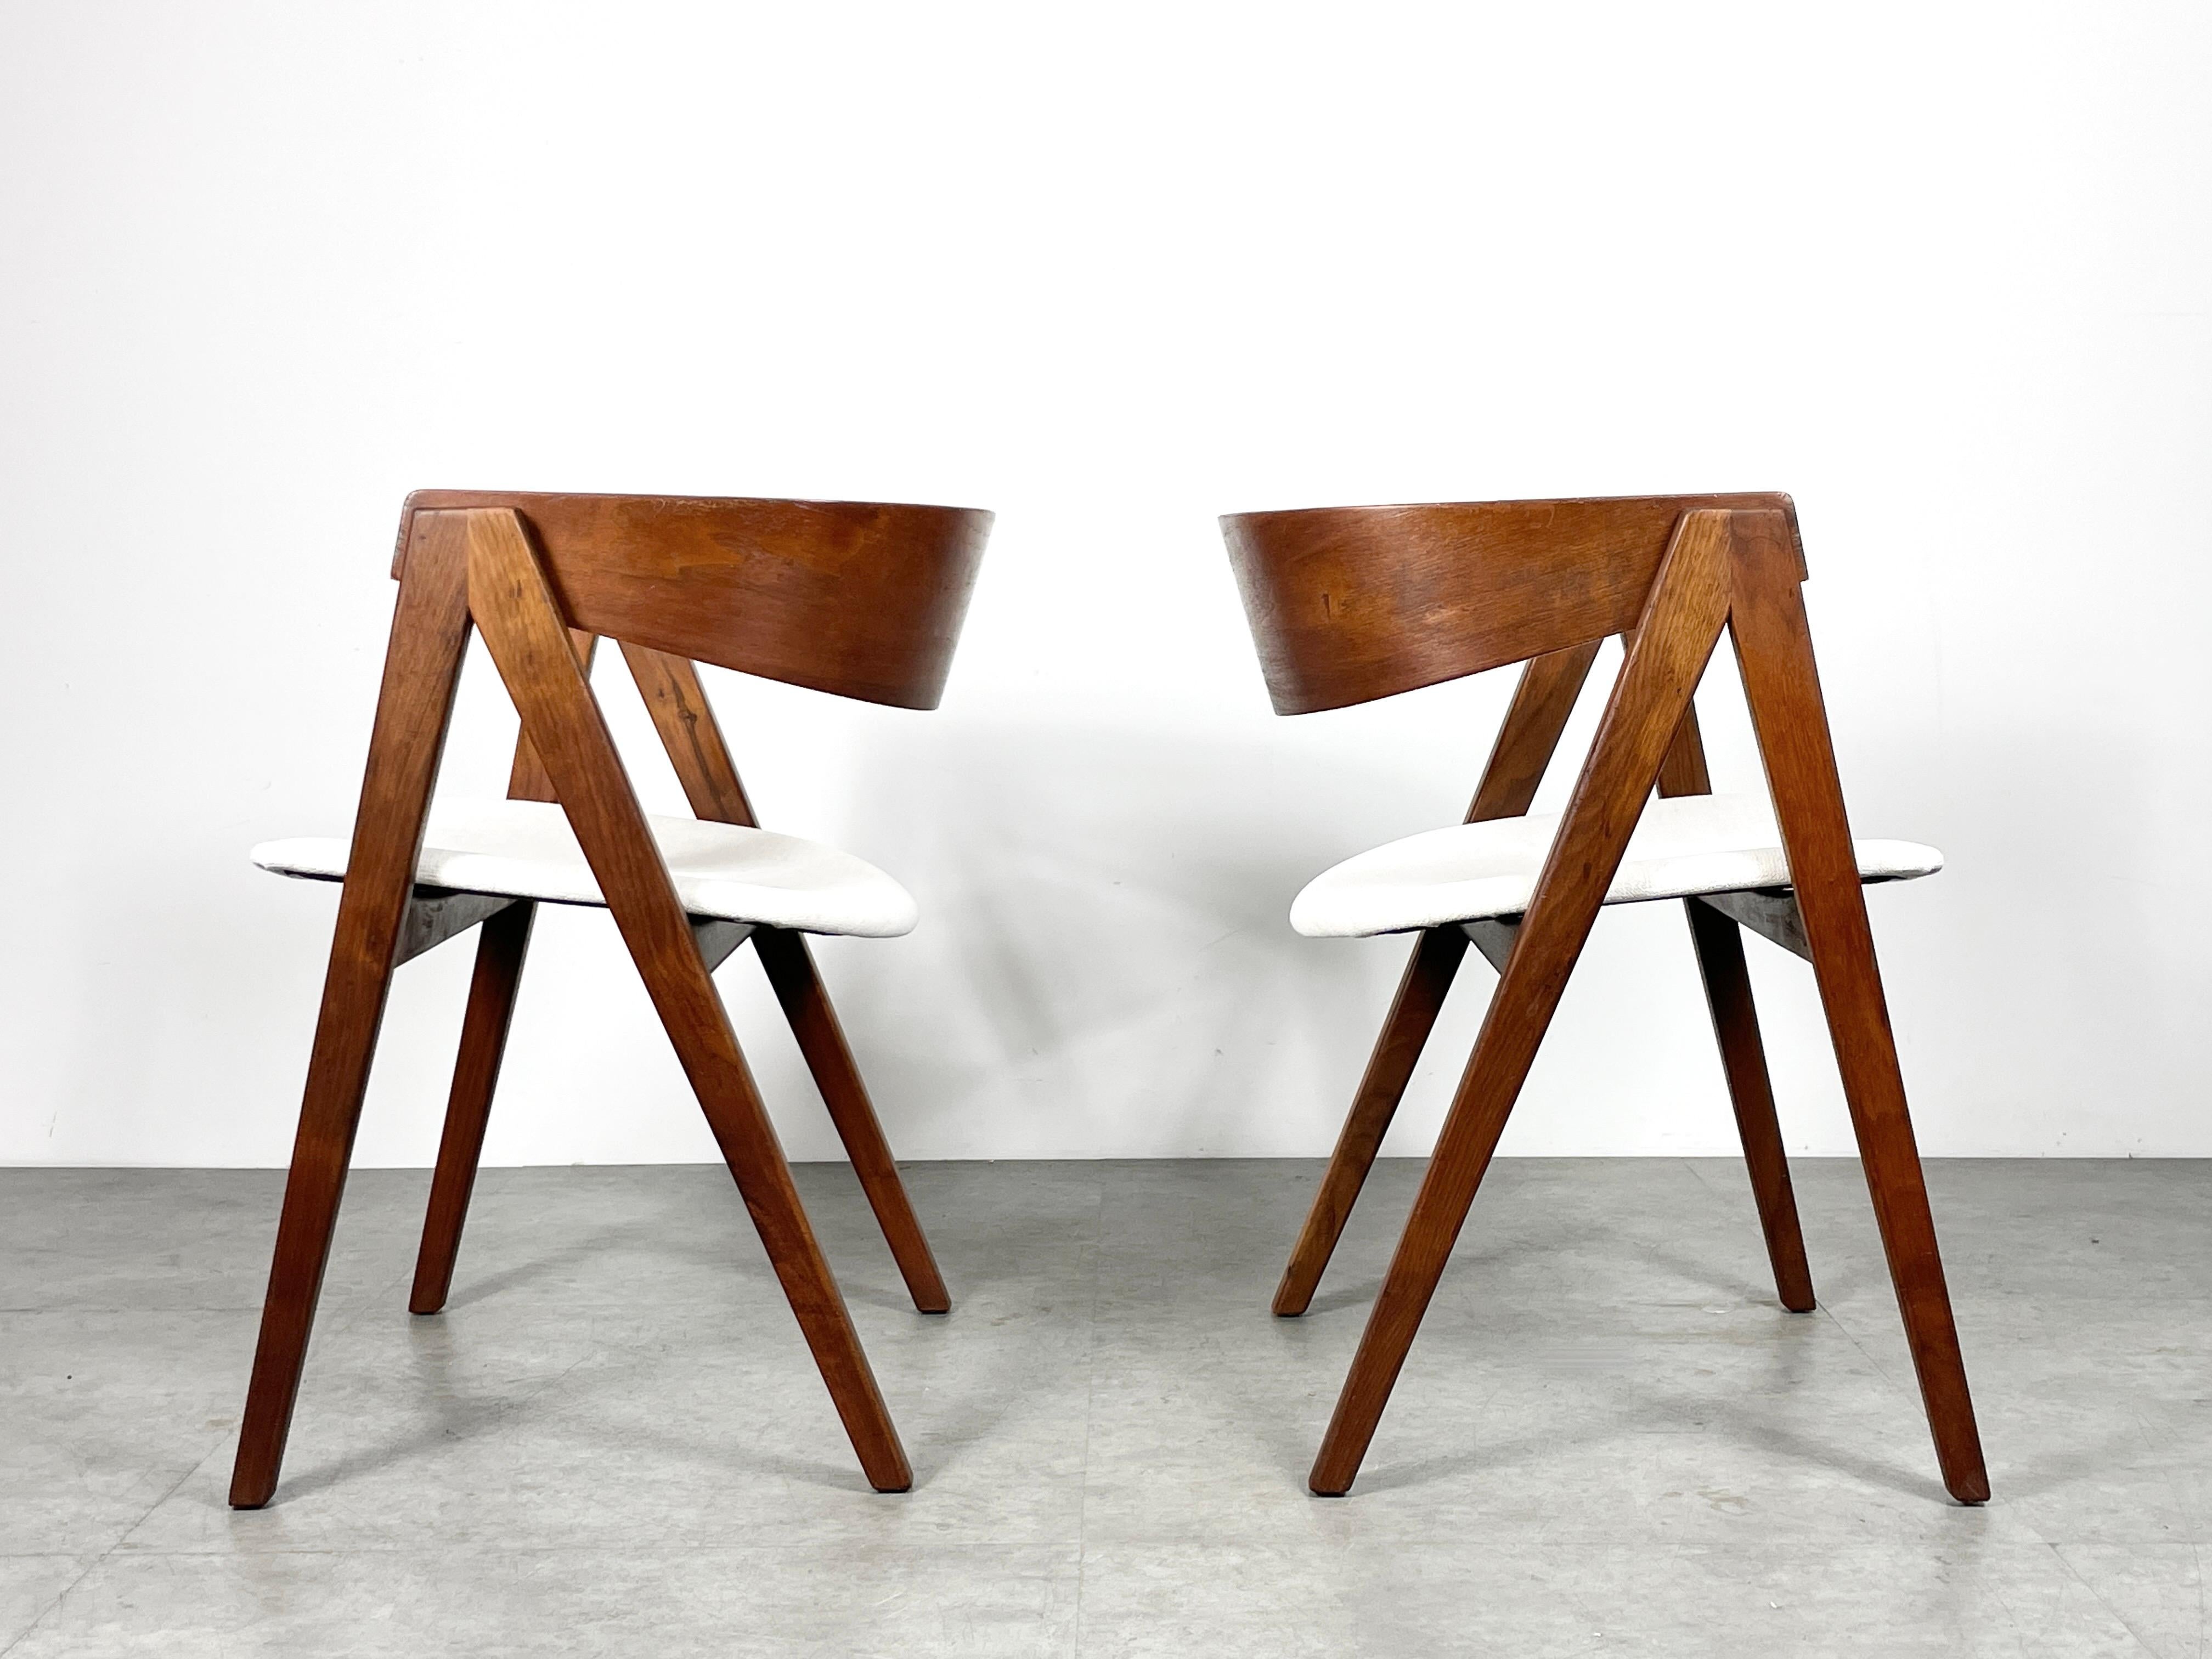 A set of six compass dining chairs designed by Allan Gould
Molded plywood back rests with inverted V legs and subtly curved seats
Produced by Allan Gould Designs Inc late 1940s to early 1950s

Seats have been re upholstered with new fabric and foam.